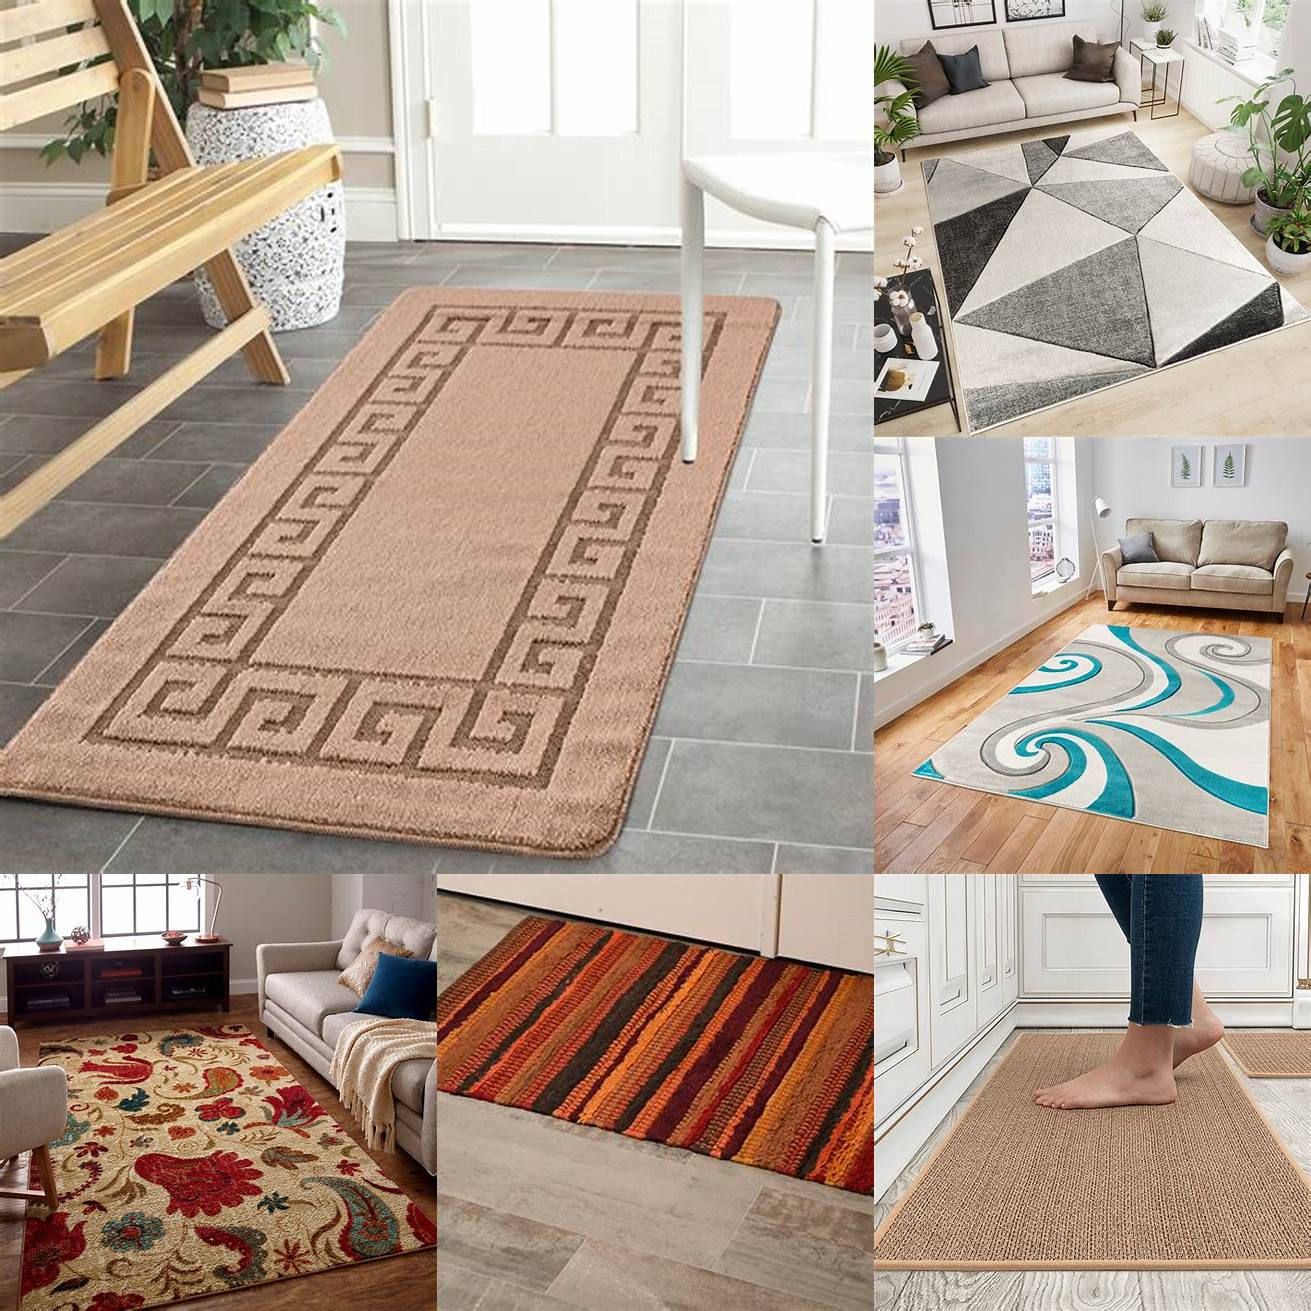 Rugs and mats